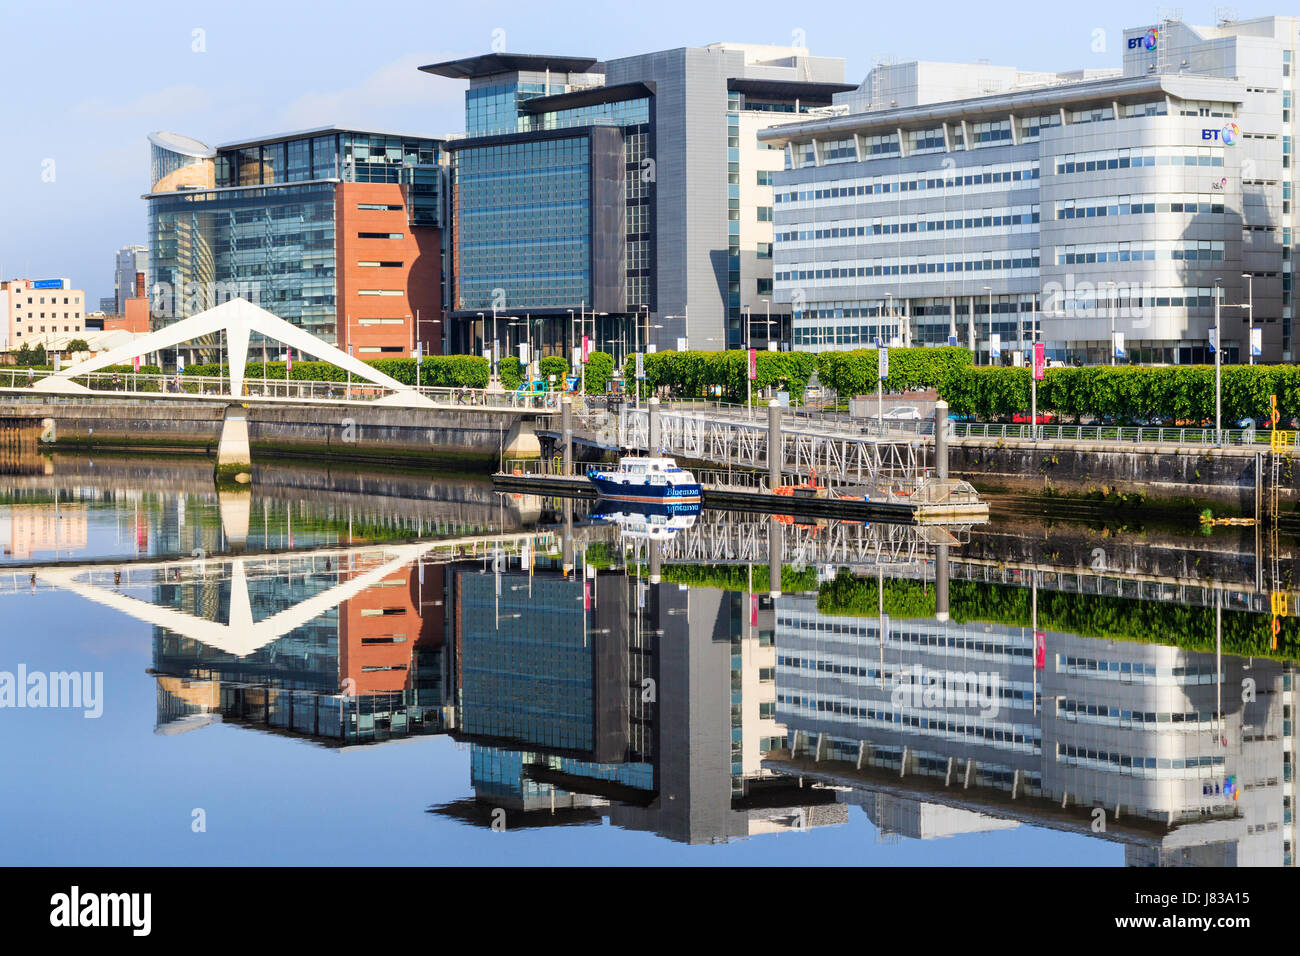 Broomielaw, Glasgow with the business, banking and commerce district viewing along the River Clyde toward the Tradeston Bridge known locally as the Sq Stock Photo